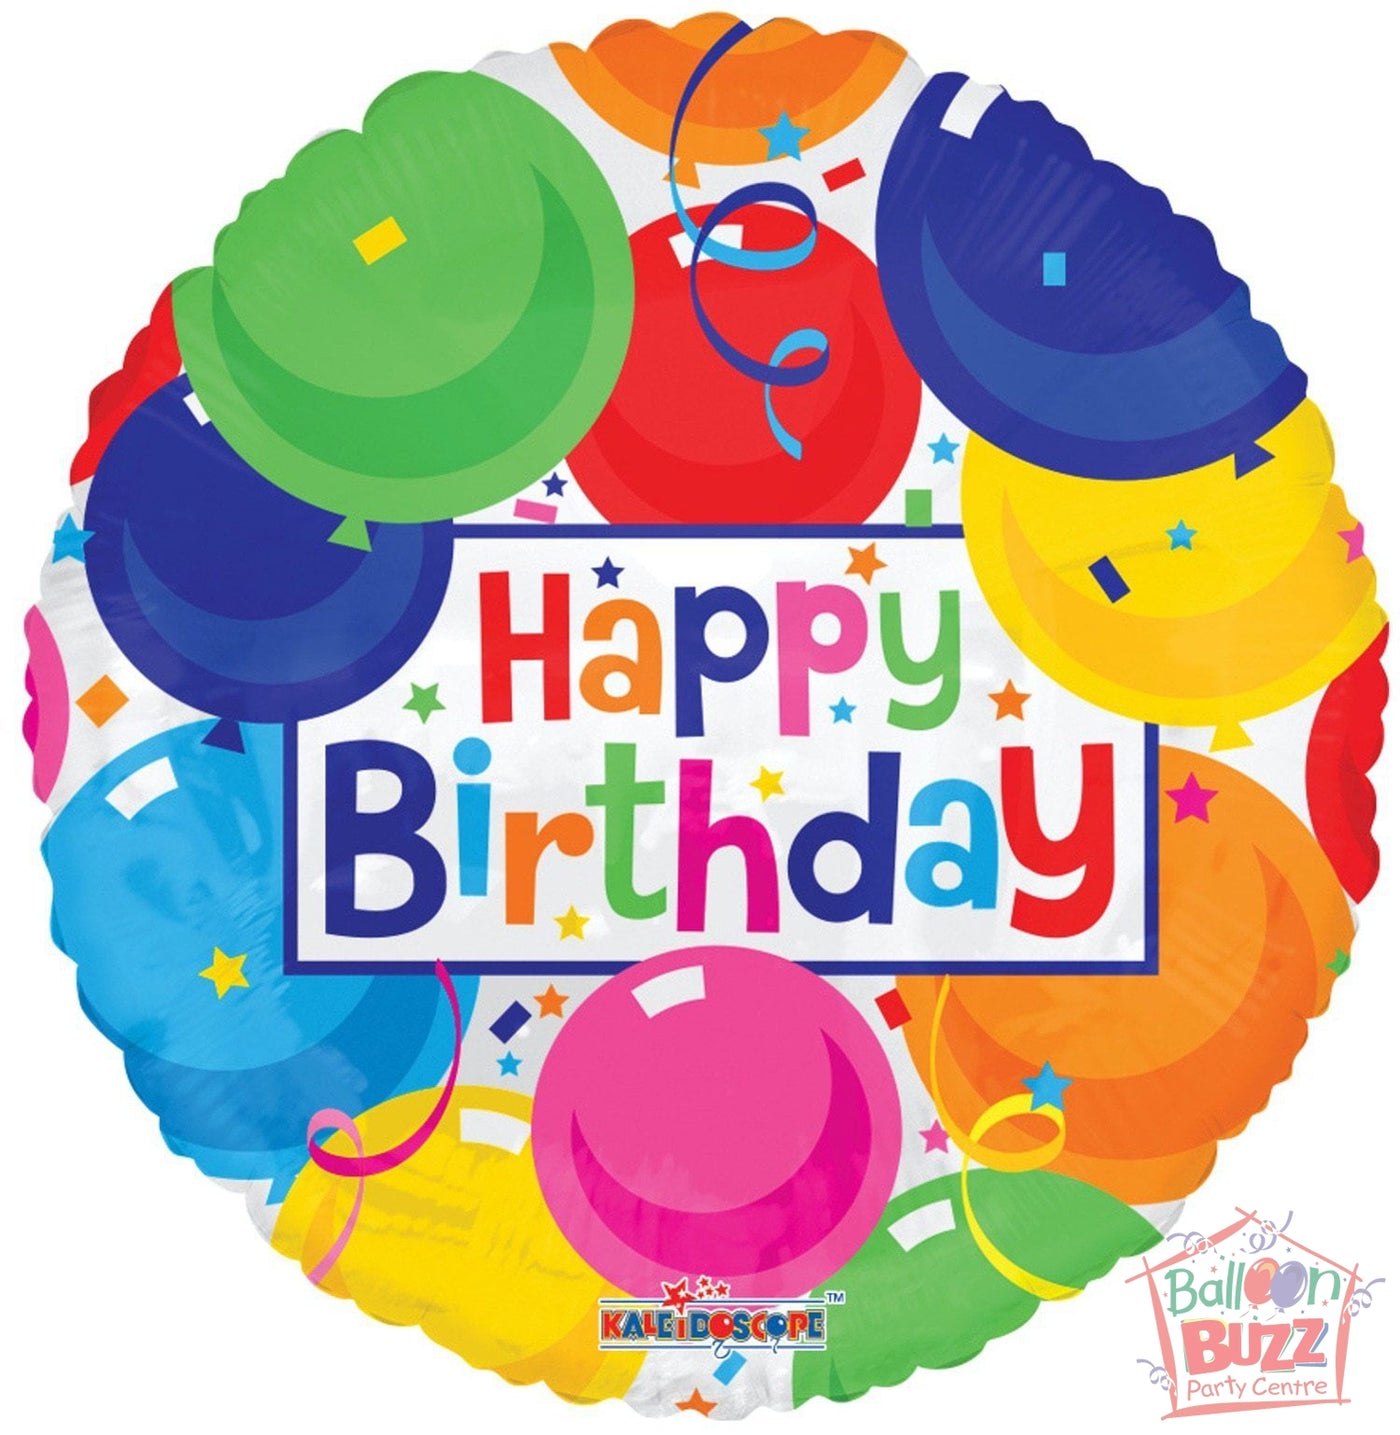 Happy Birthday Colorful Balloons - 18 inch - Helium-Filled Foil Balloon